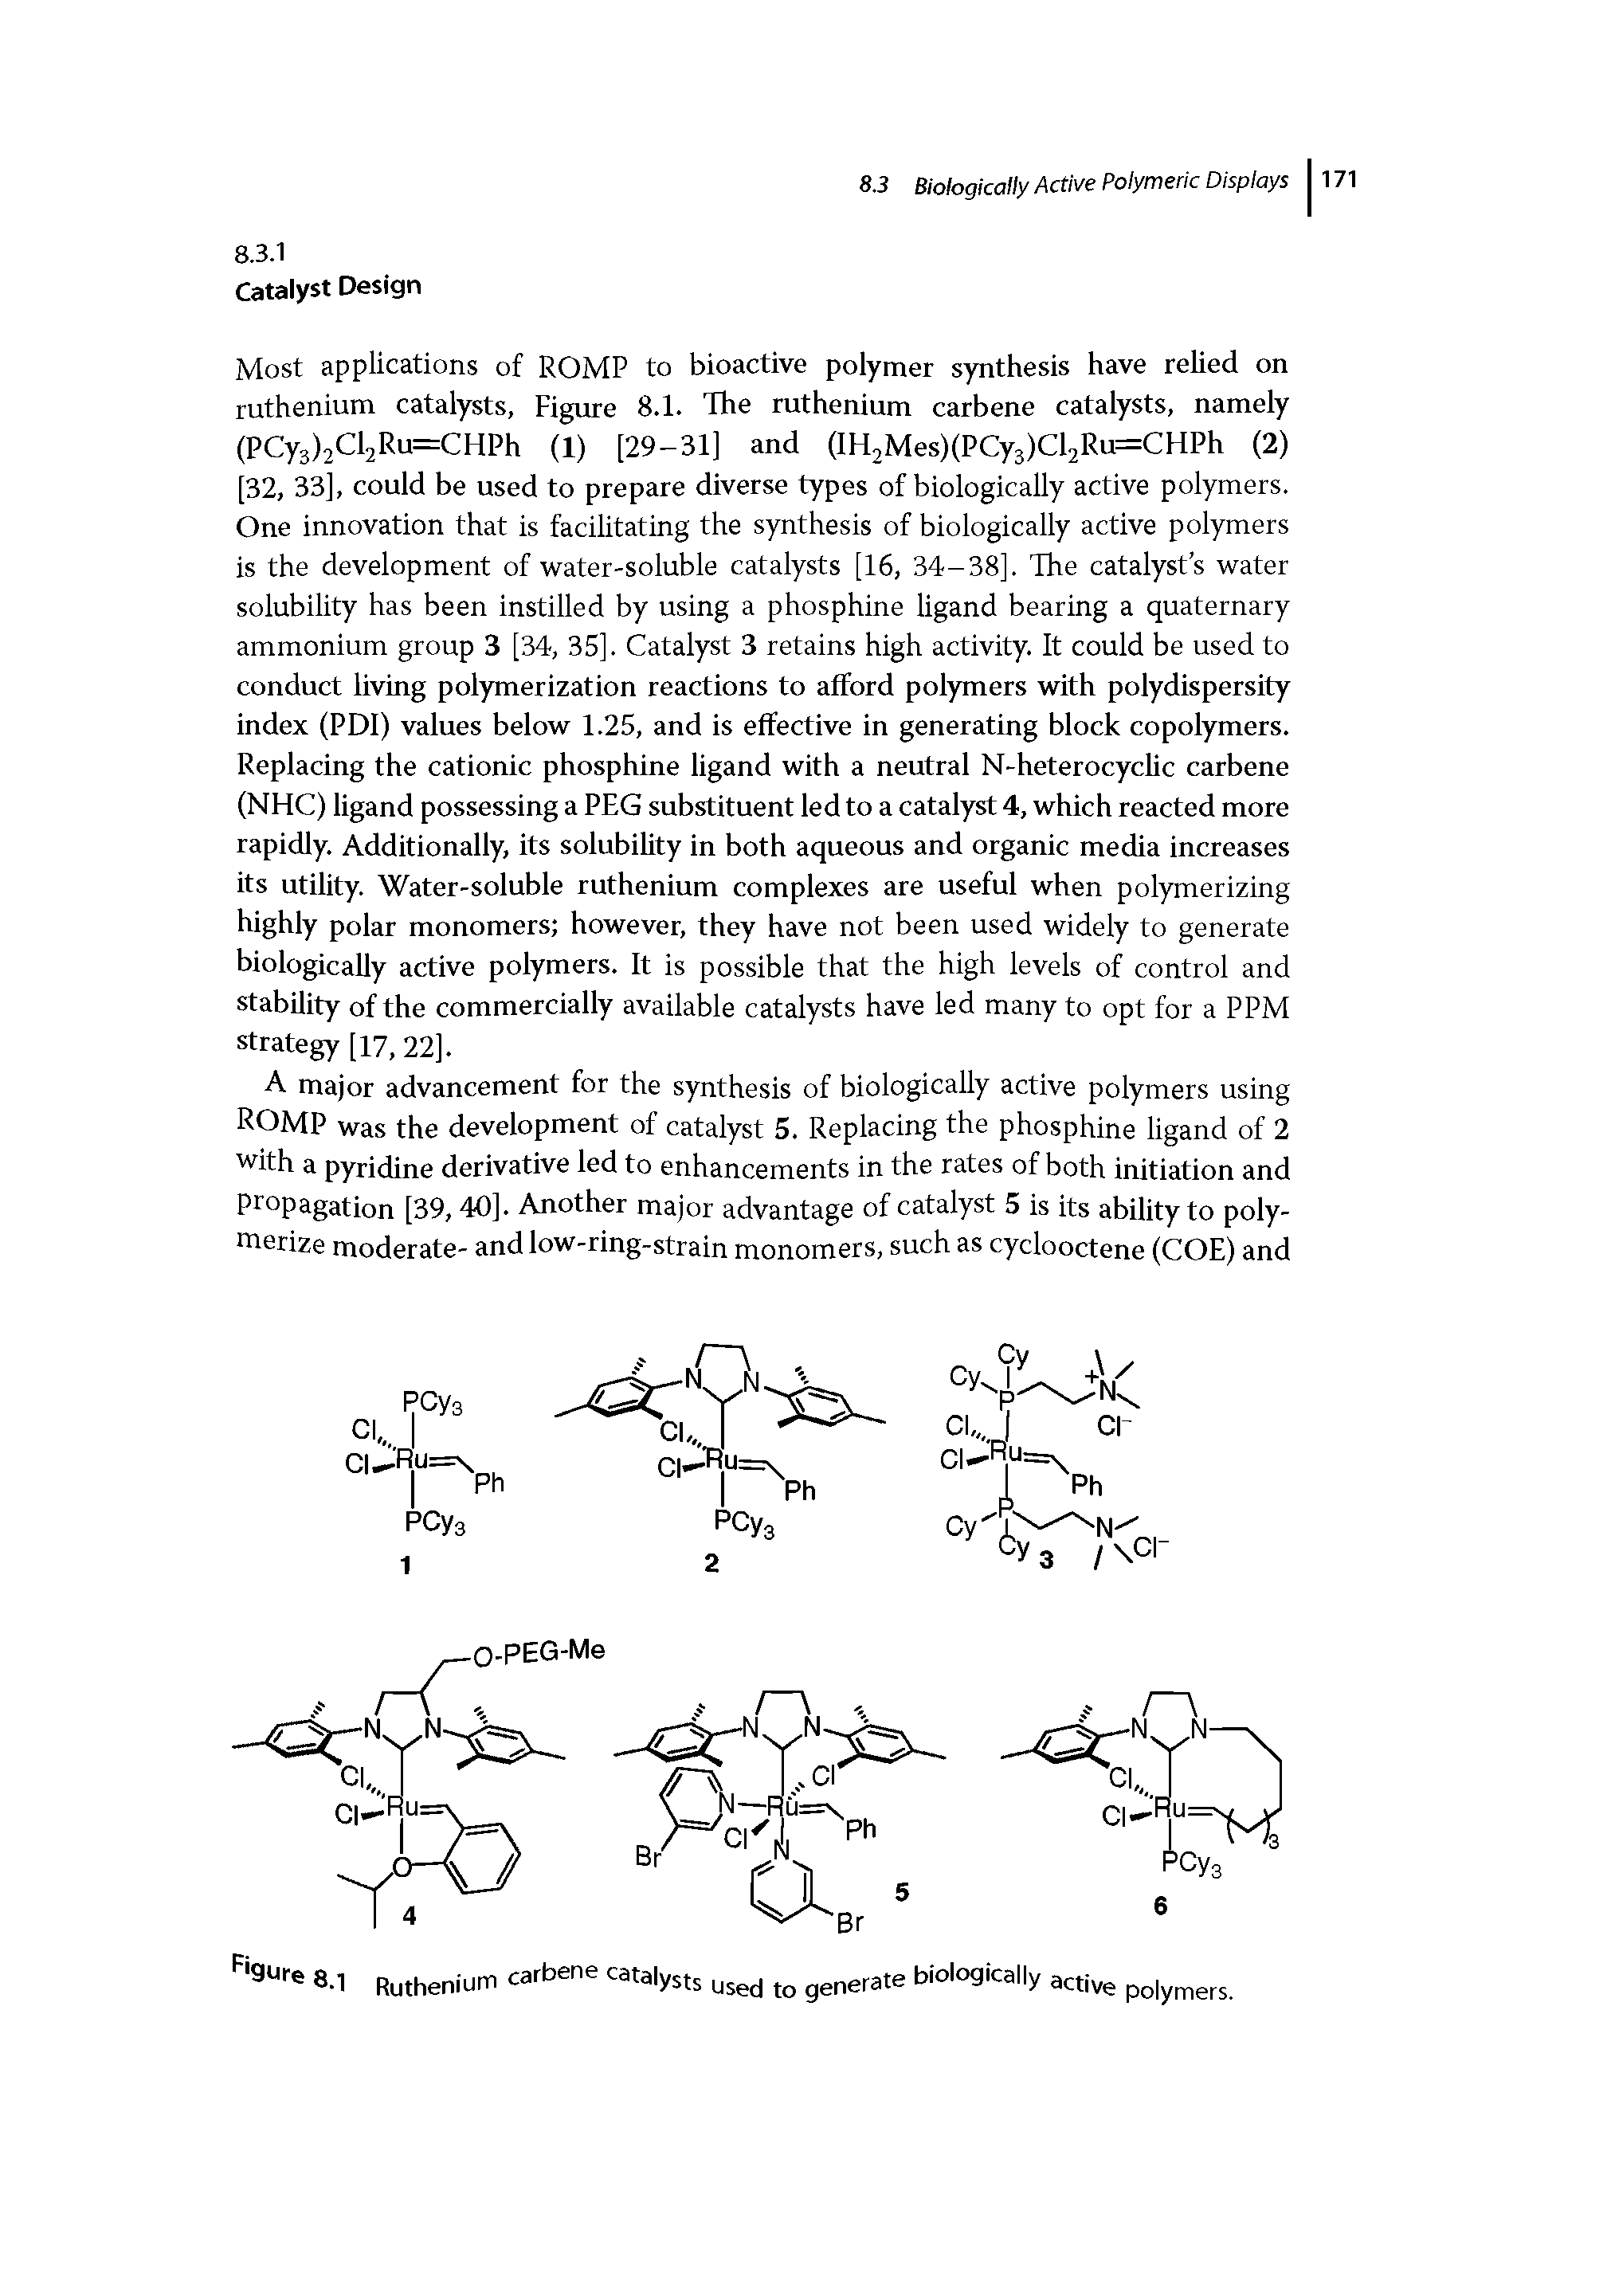 Figure 8.1 Ruthenium carbene catalysts used to generate biologically...